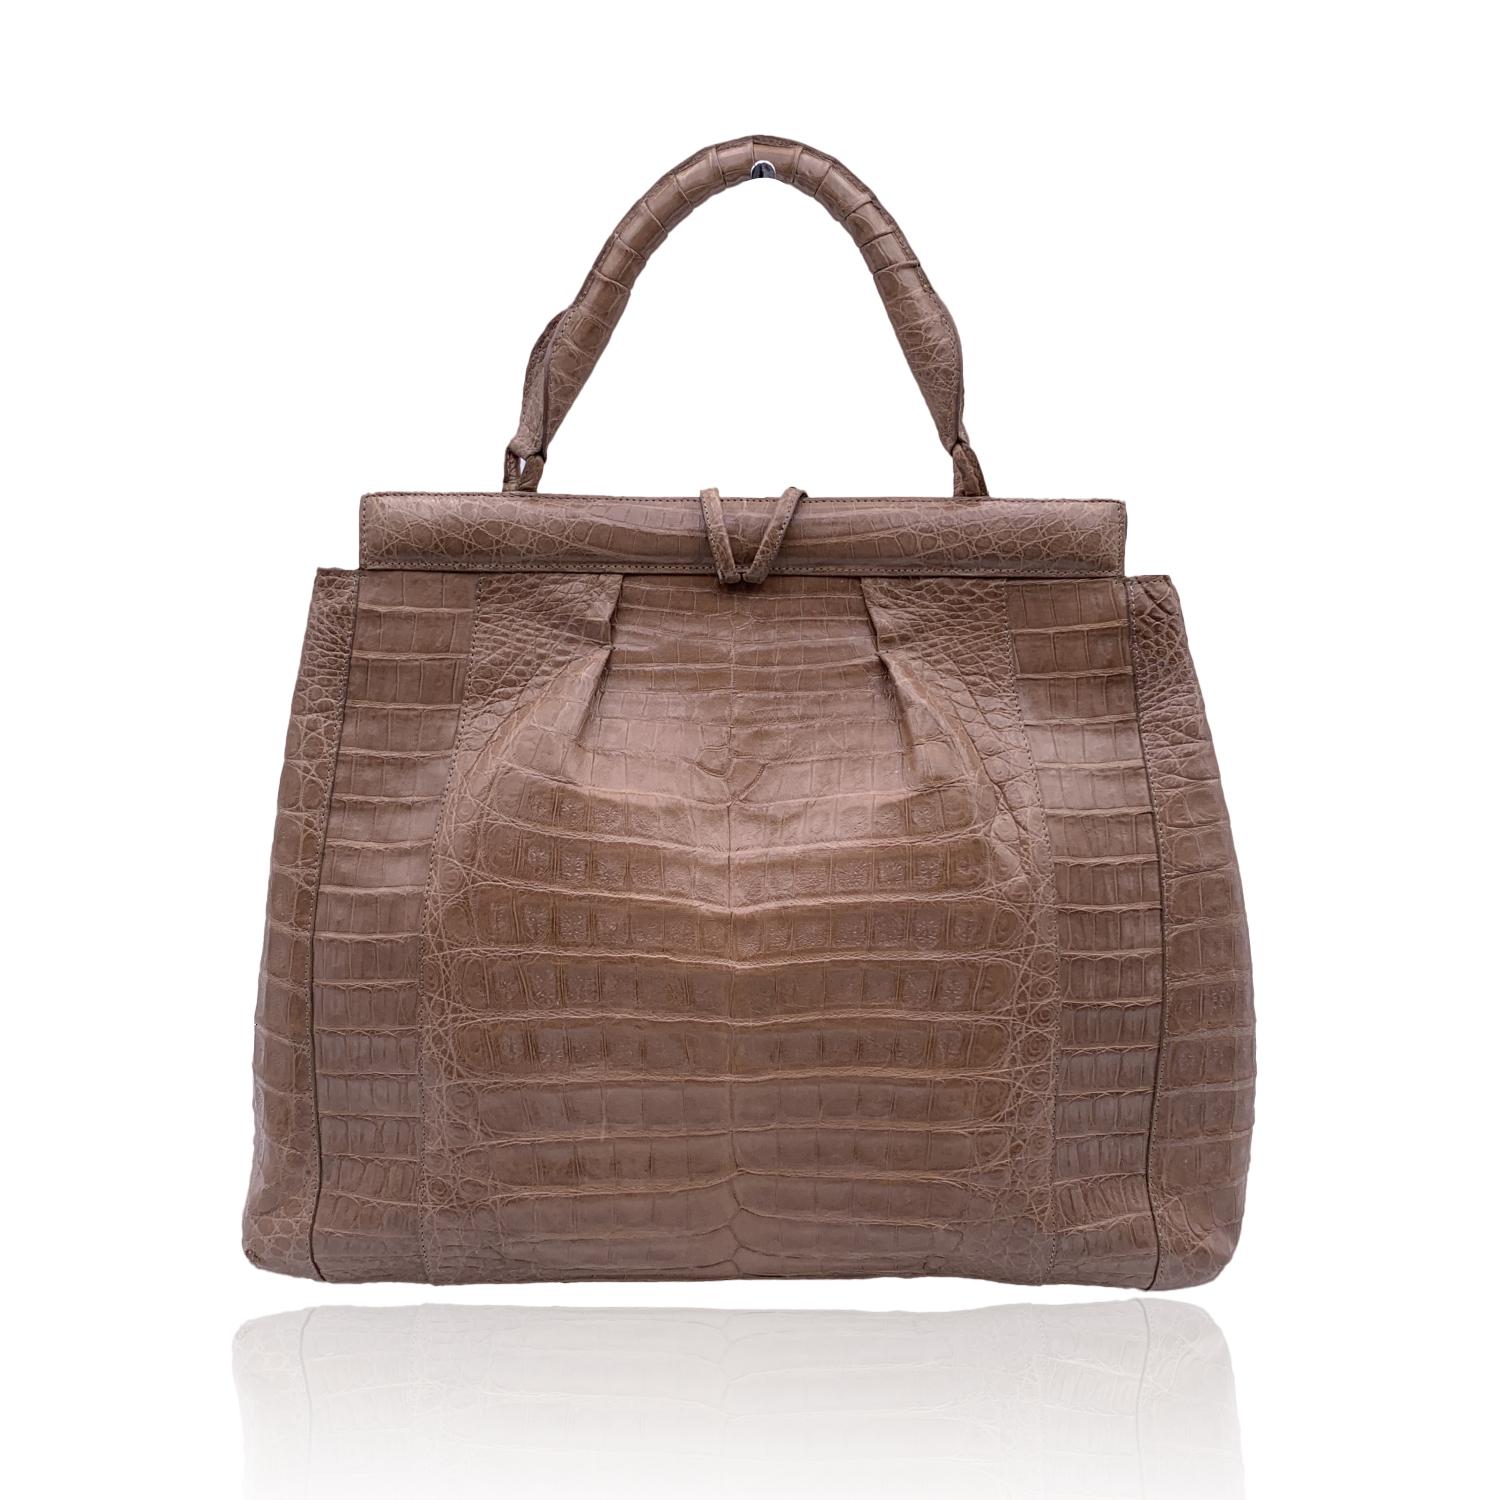 Nancy Gonzales Taupe Leather Satchel Handbag Top Handle Bag In Excellent Condition For Sale In Rome, Rome